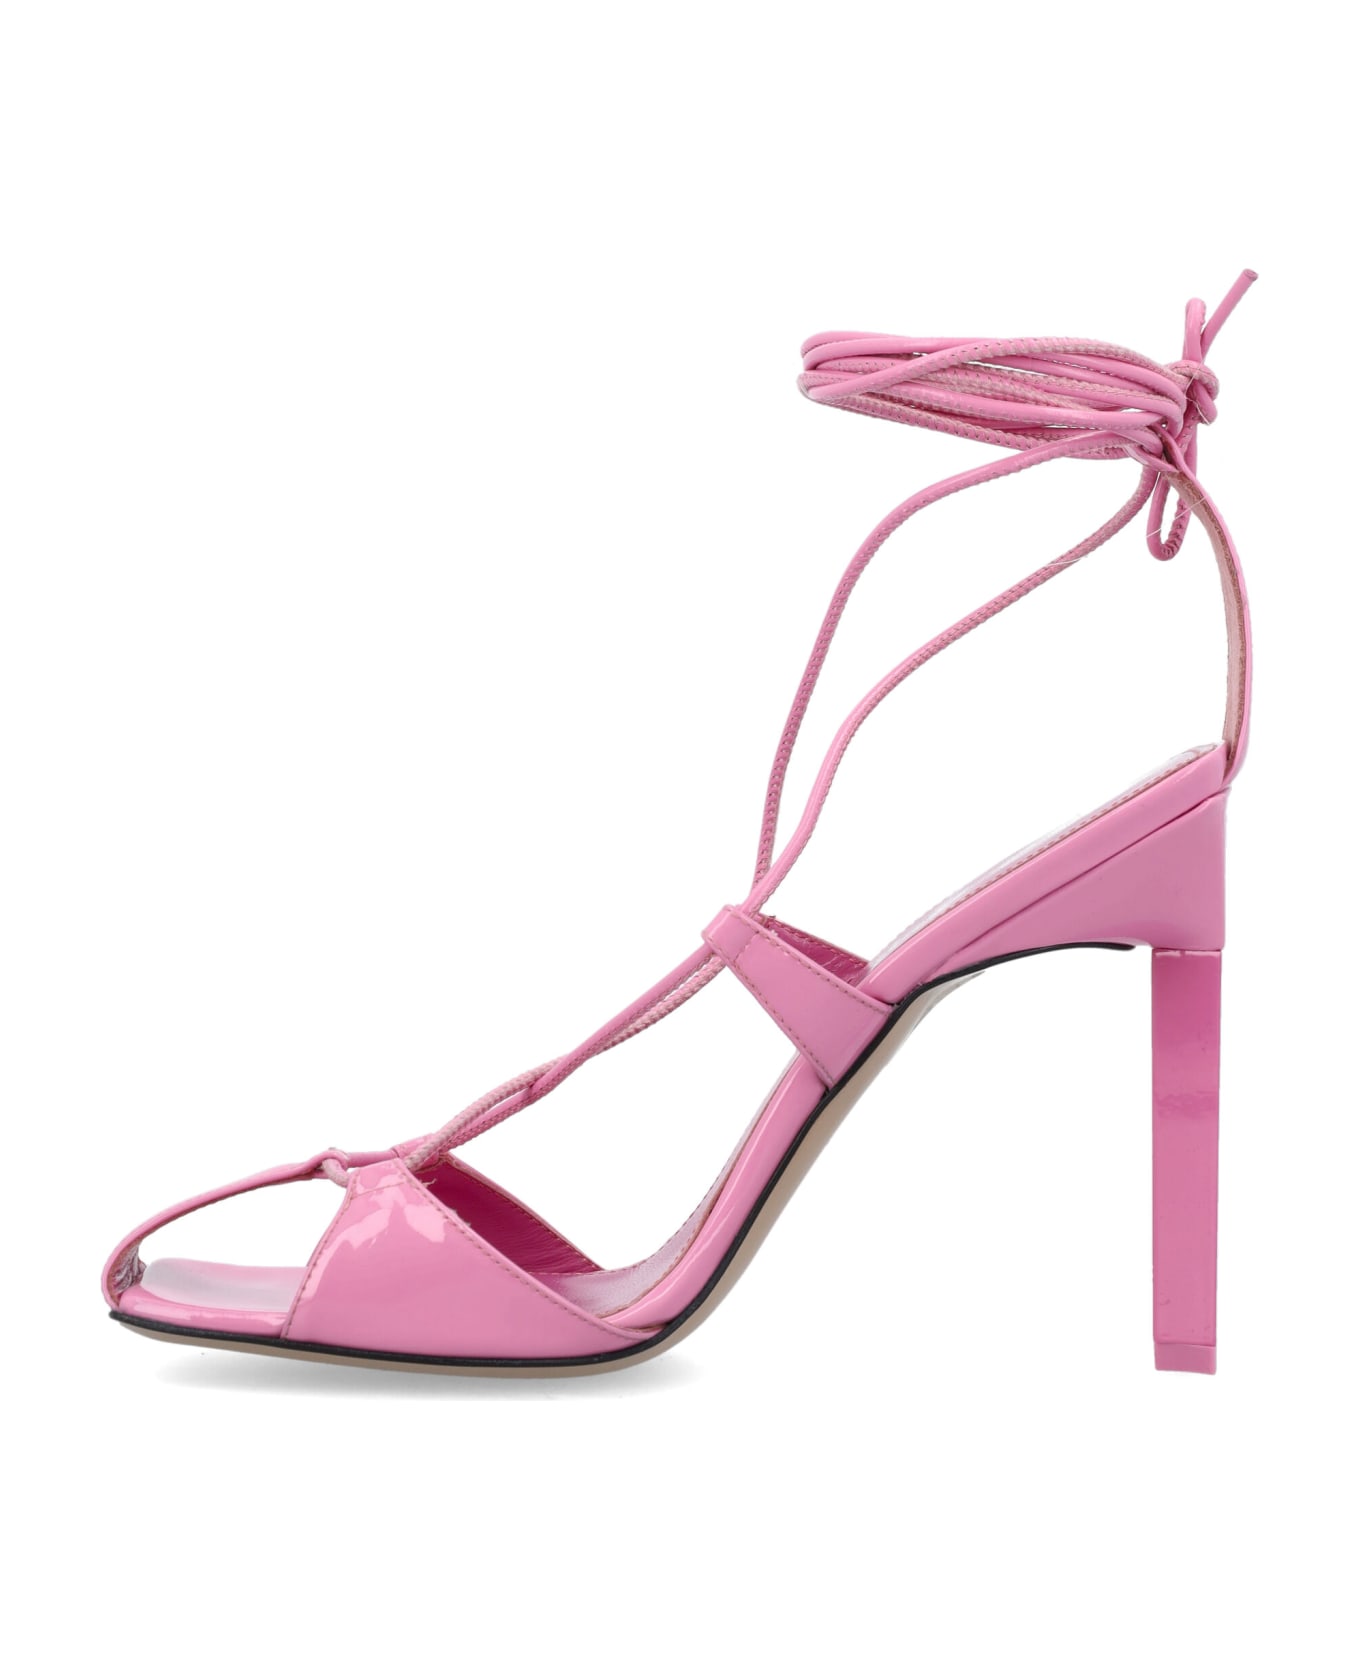 The Attico Adele Lace-up Sandal 105 - Light pink